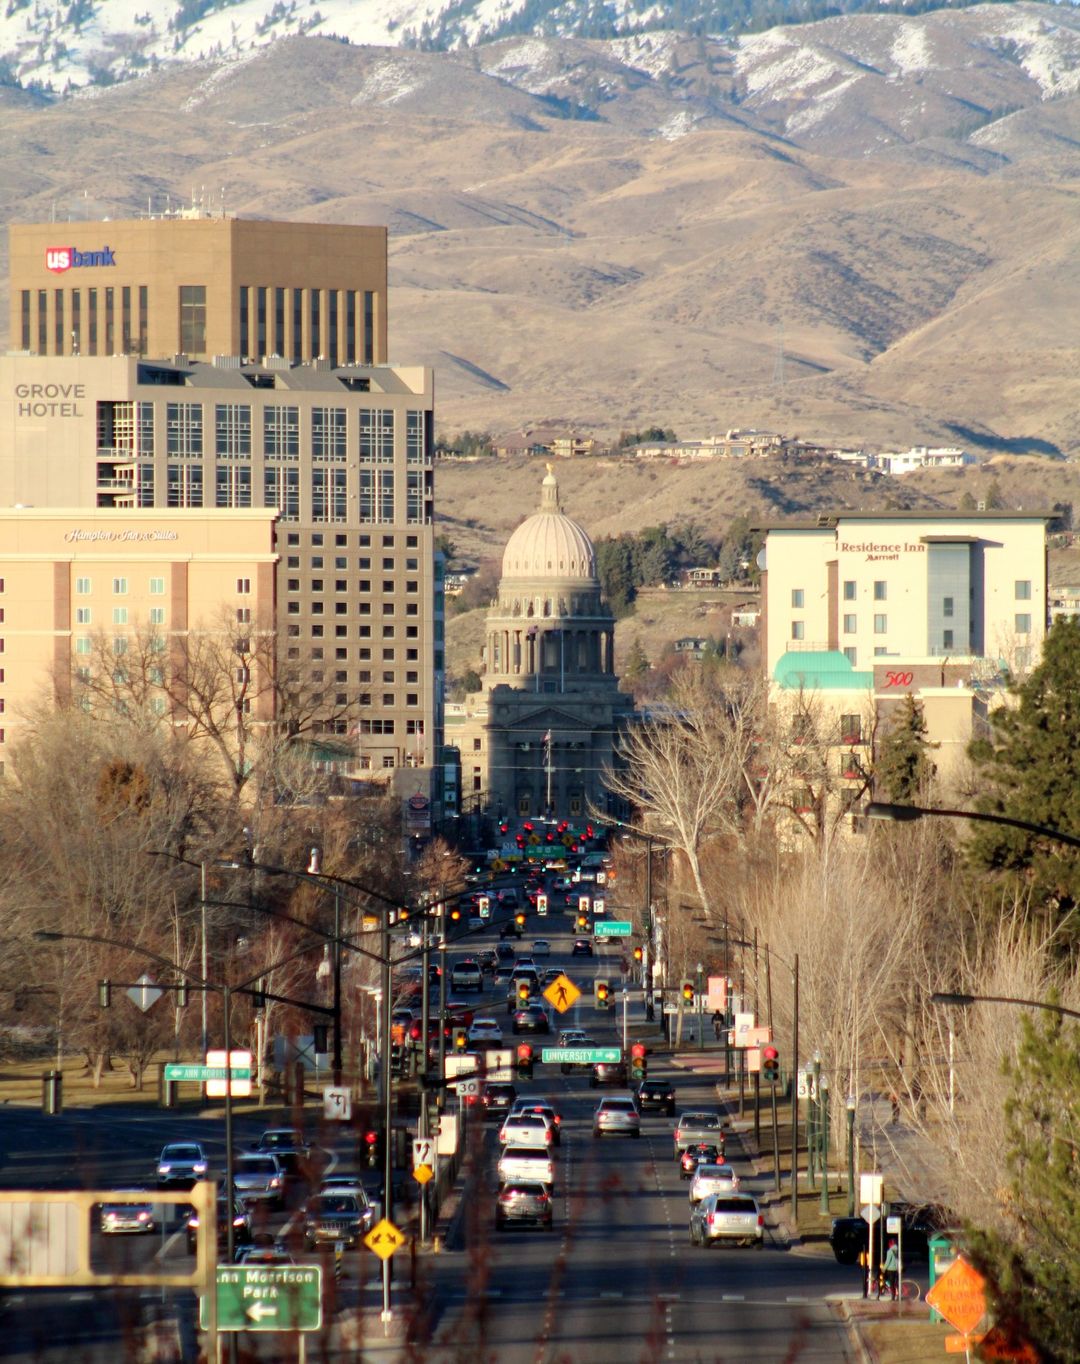 Skyline shot of Boise, ID with capitol building in the distance. Photo by Instagram user @davenackers